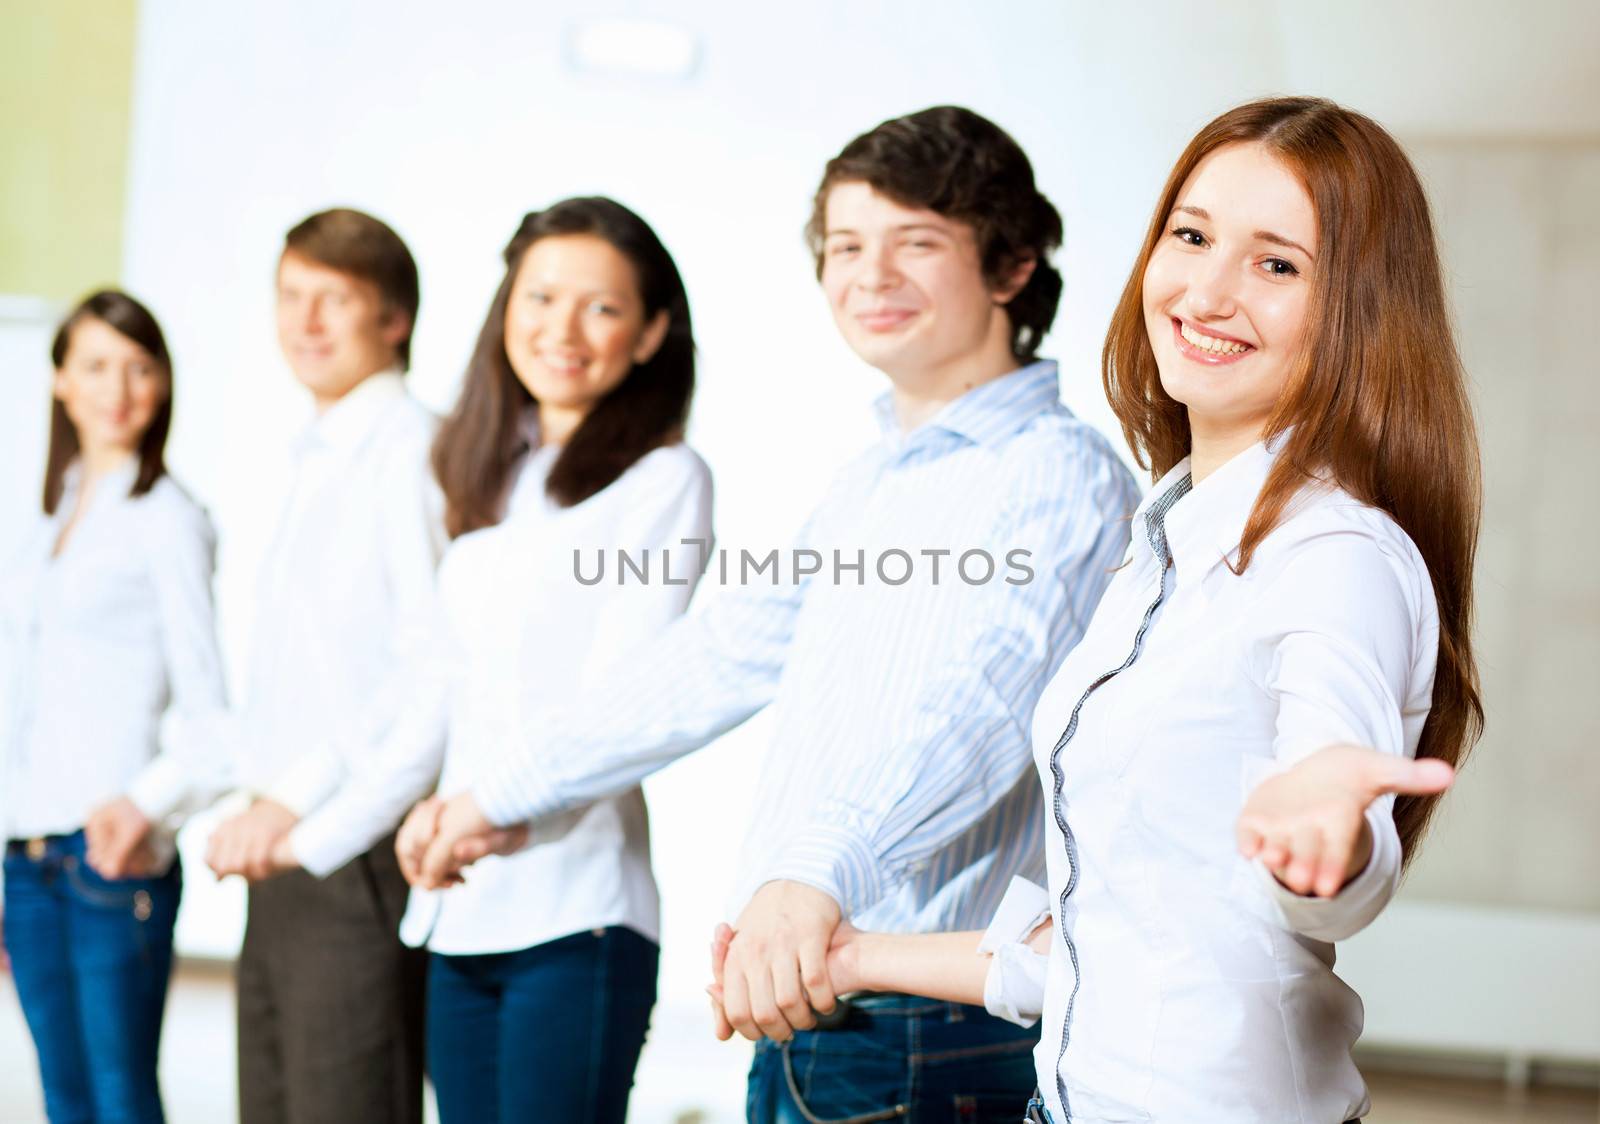 Five students smiling by sergey_nivens